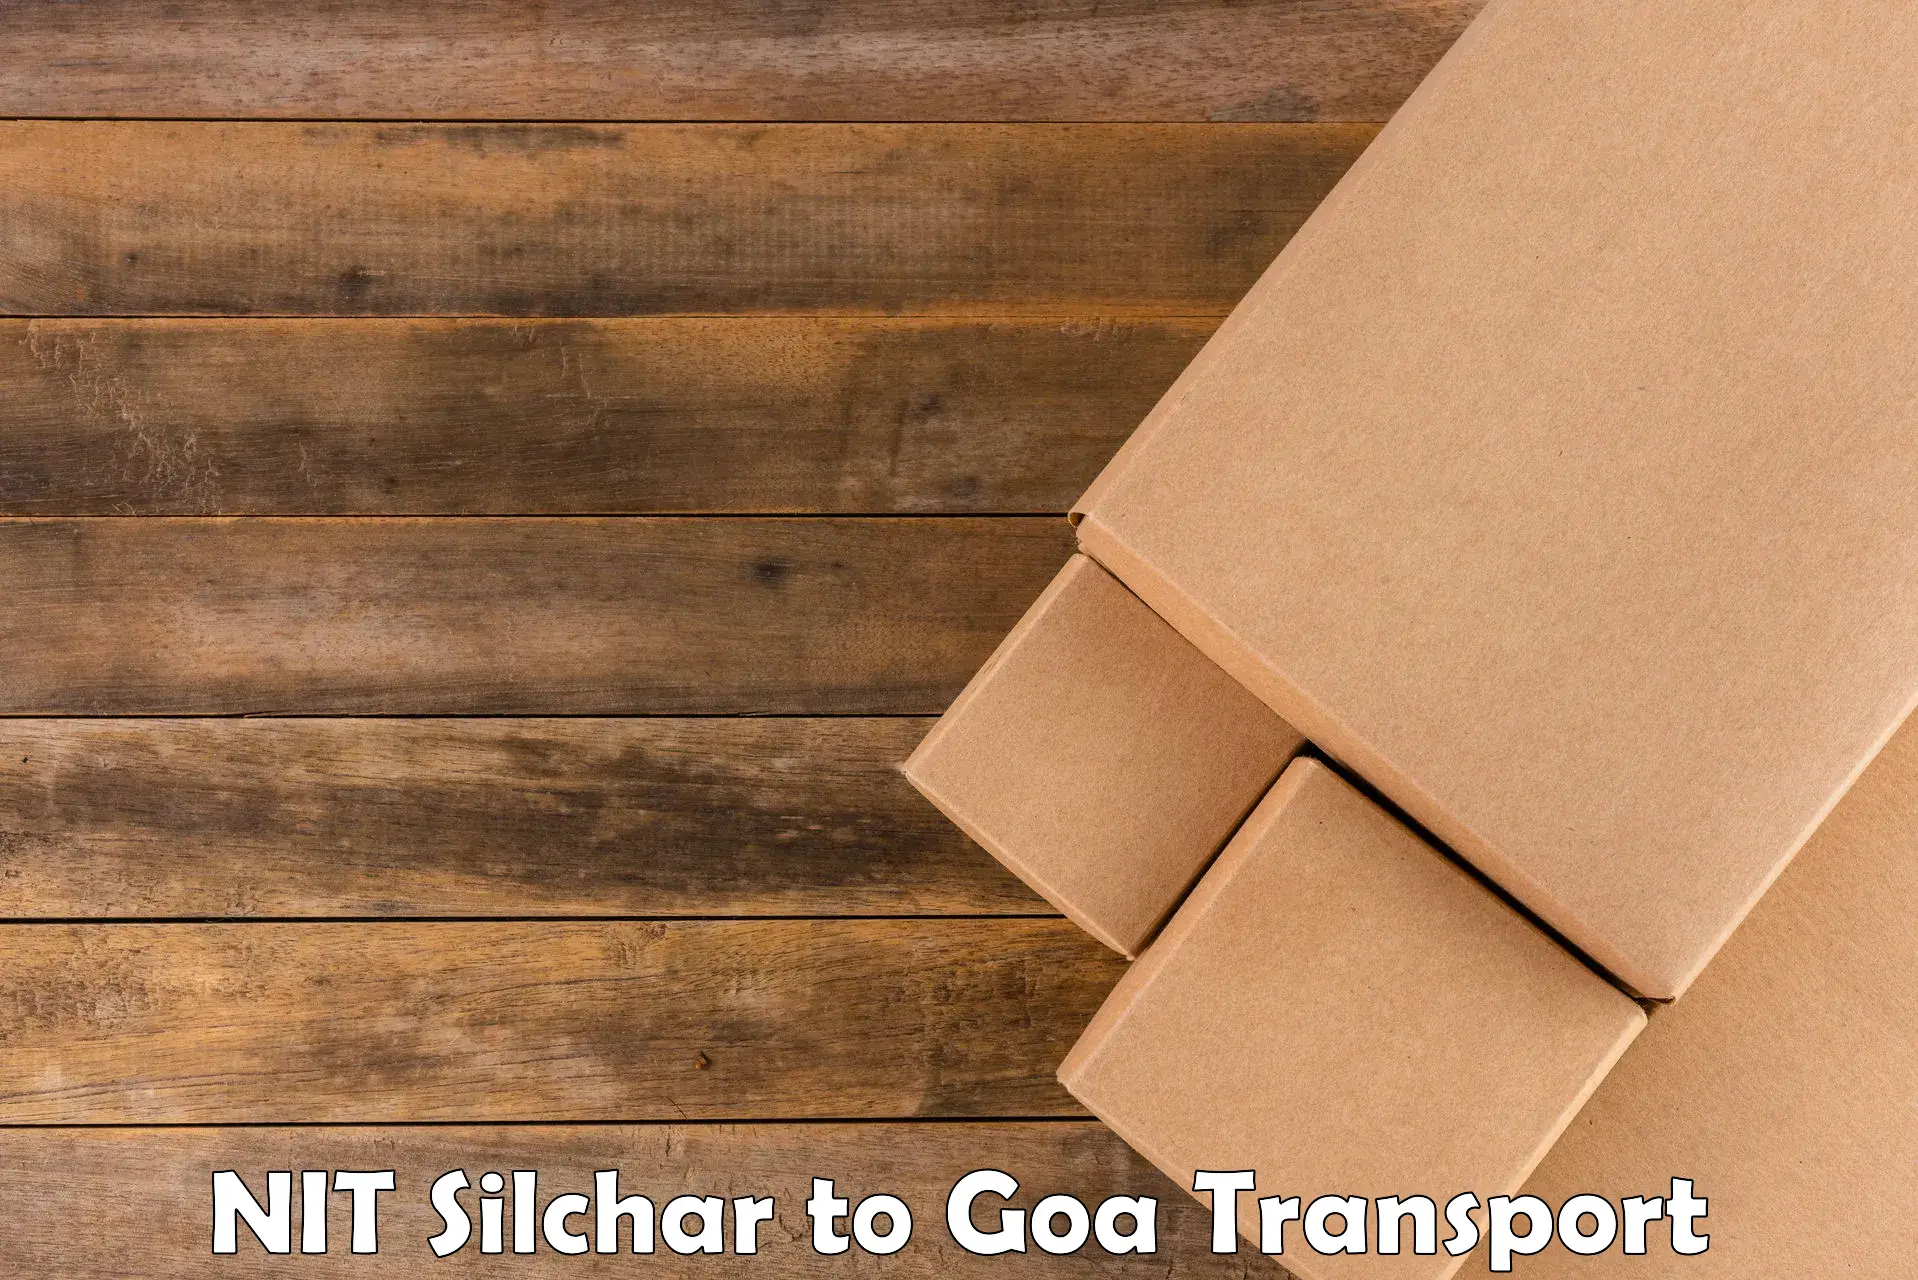 Cargo train transport services NIT Silchar to Margao